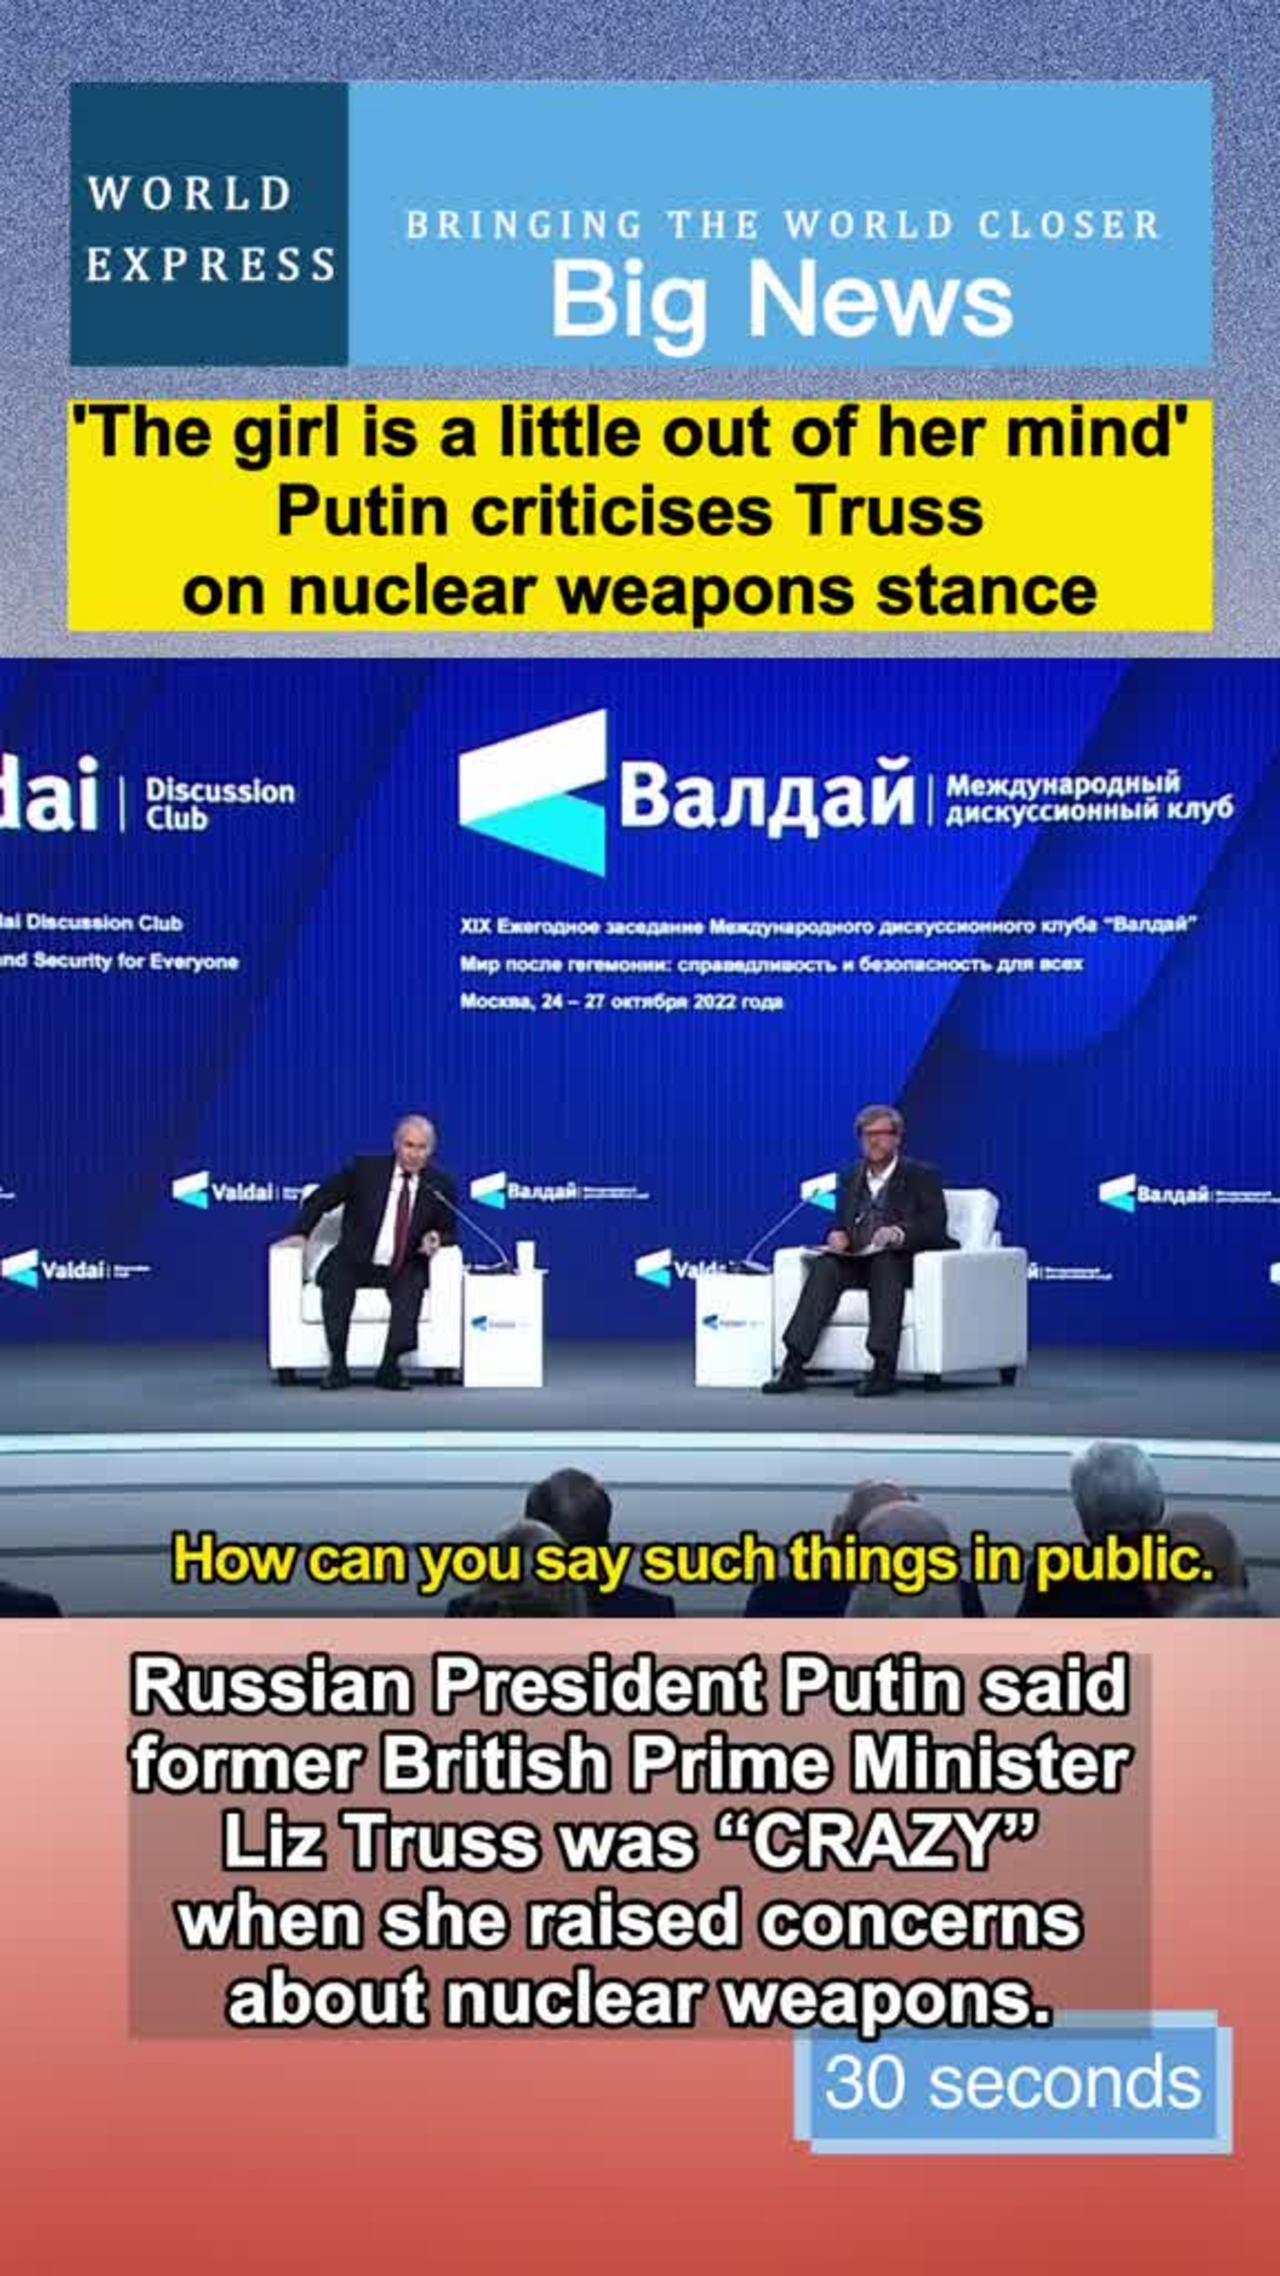 "The girl is a little out of her mind' Putin criticises Truss on nuclear weapons stance